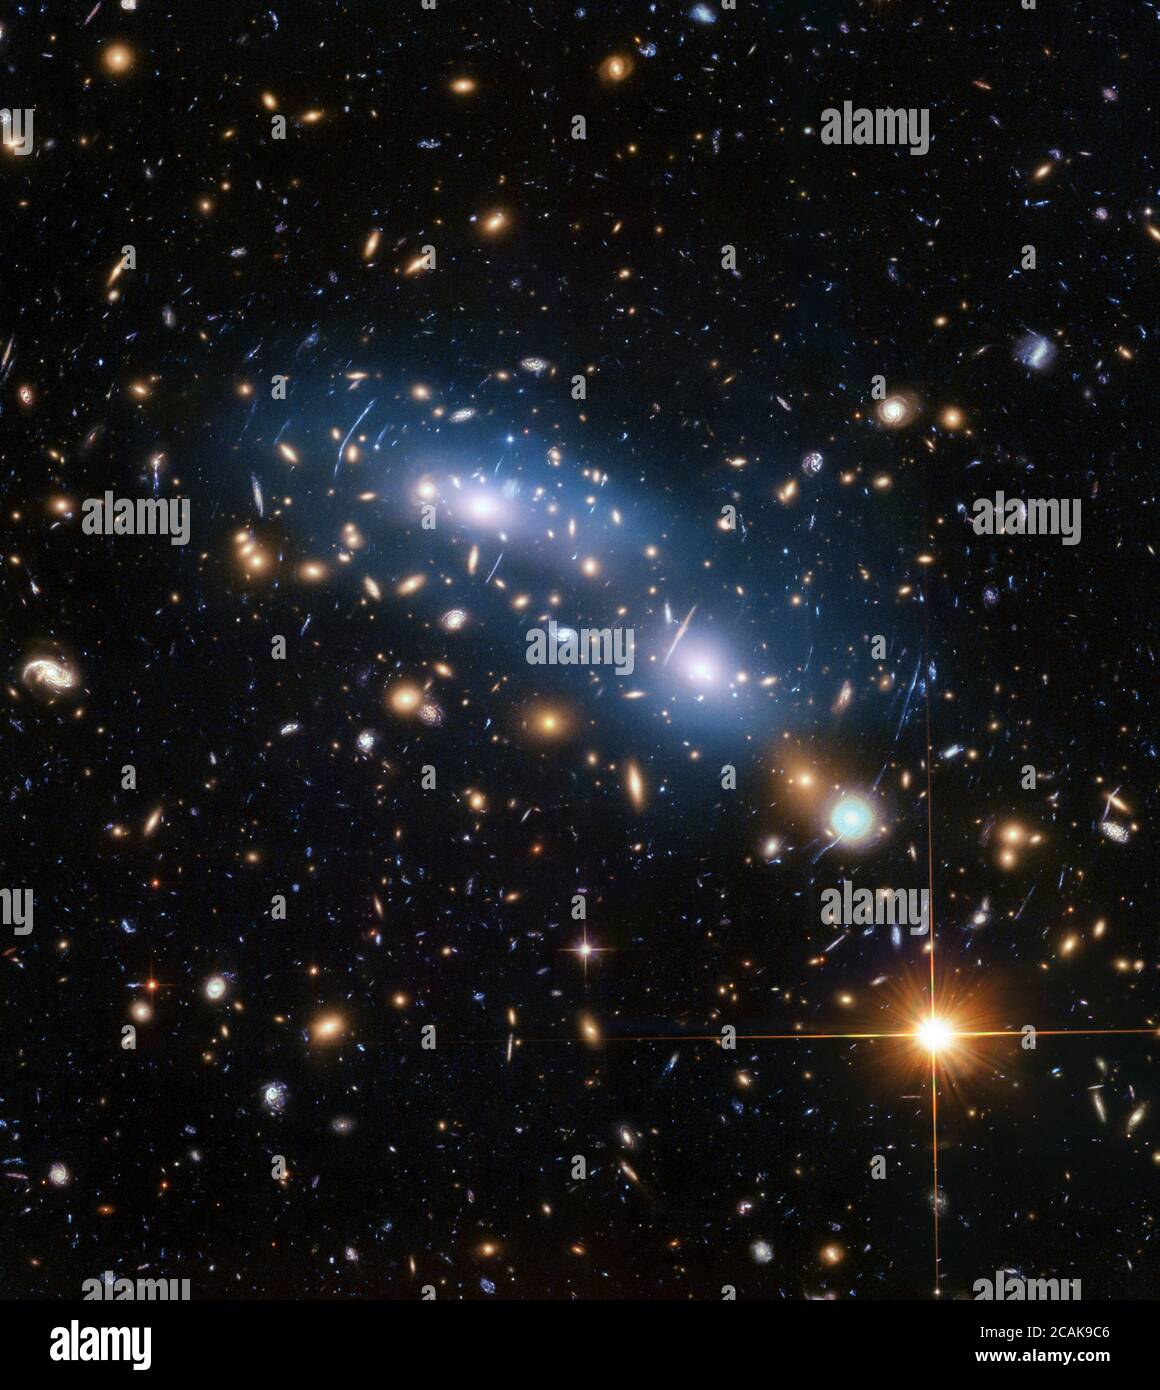 This image from the NASA/ESA Hubble Space Telescope shows the galaxy cluster MACS J0416. This is one of six being studied by the Hubble Frontier Fields programme, which together have produced the deepest images of gravitational lensing ever made. Scientists used intracluster light (visible in blue) to study the distribution of dark matter within the cluster. Stock Photo